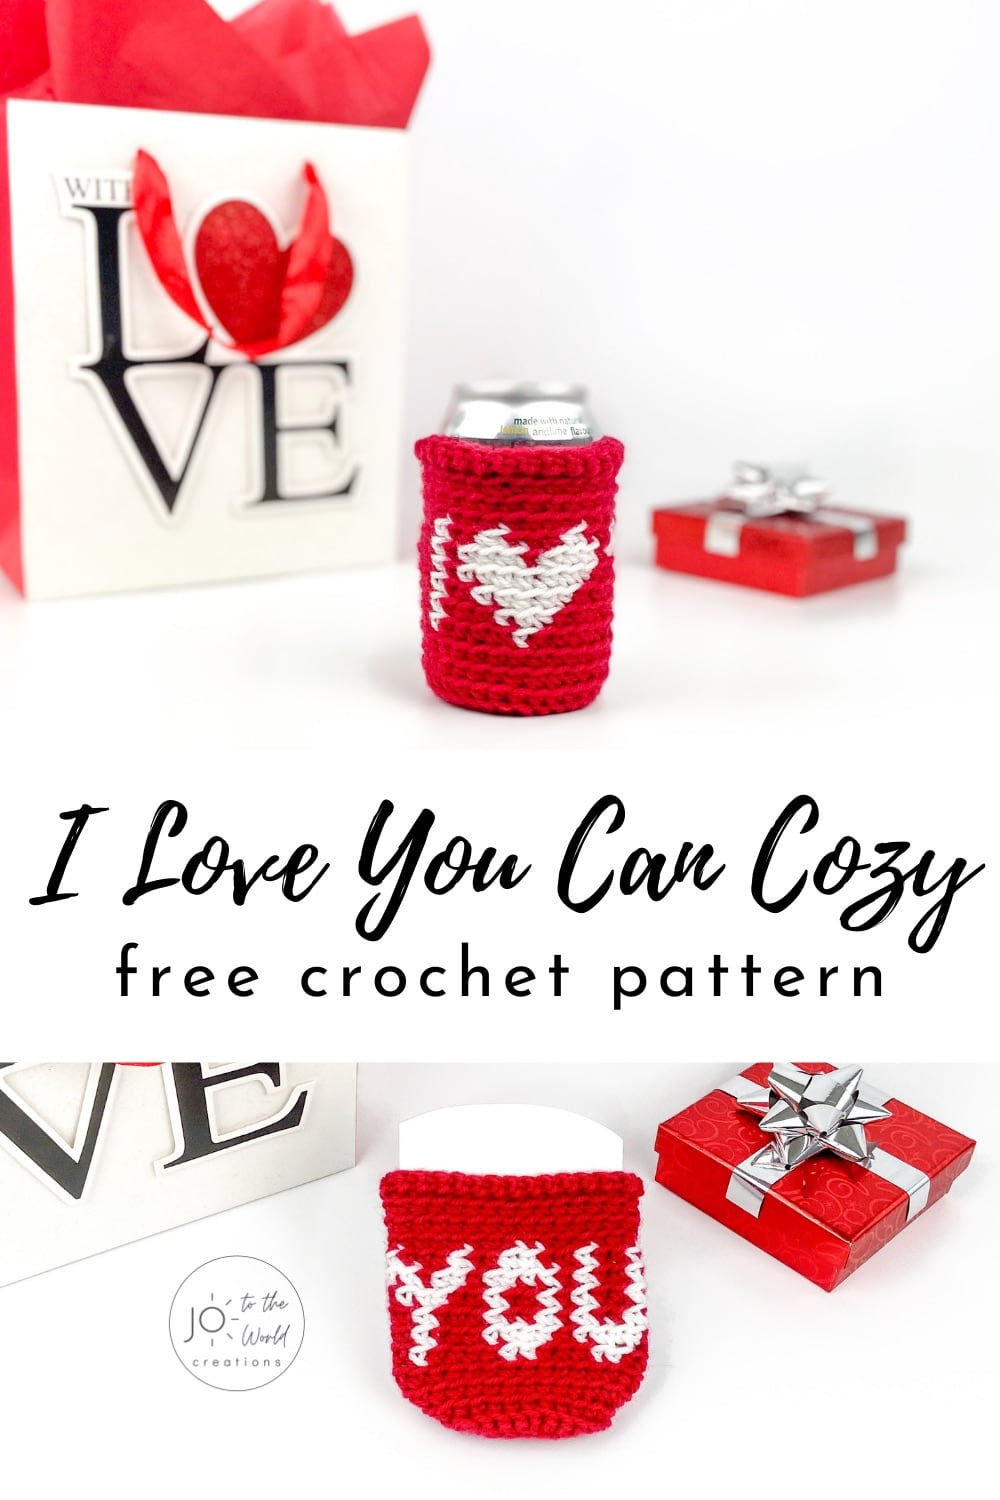 I Love You Can Cozy Crochet Pattern